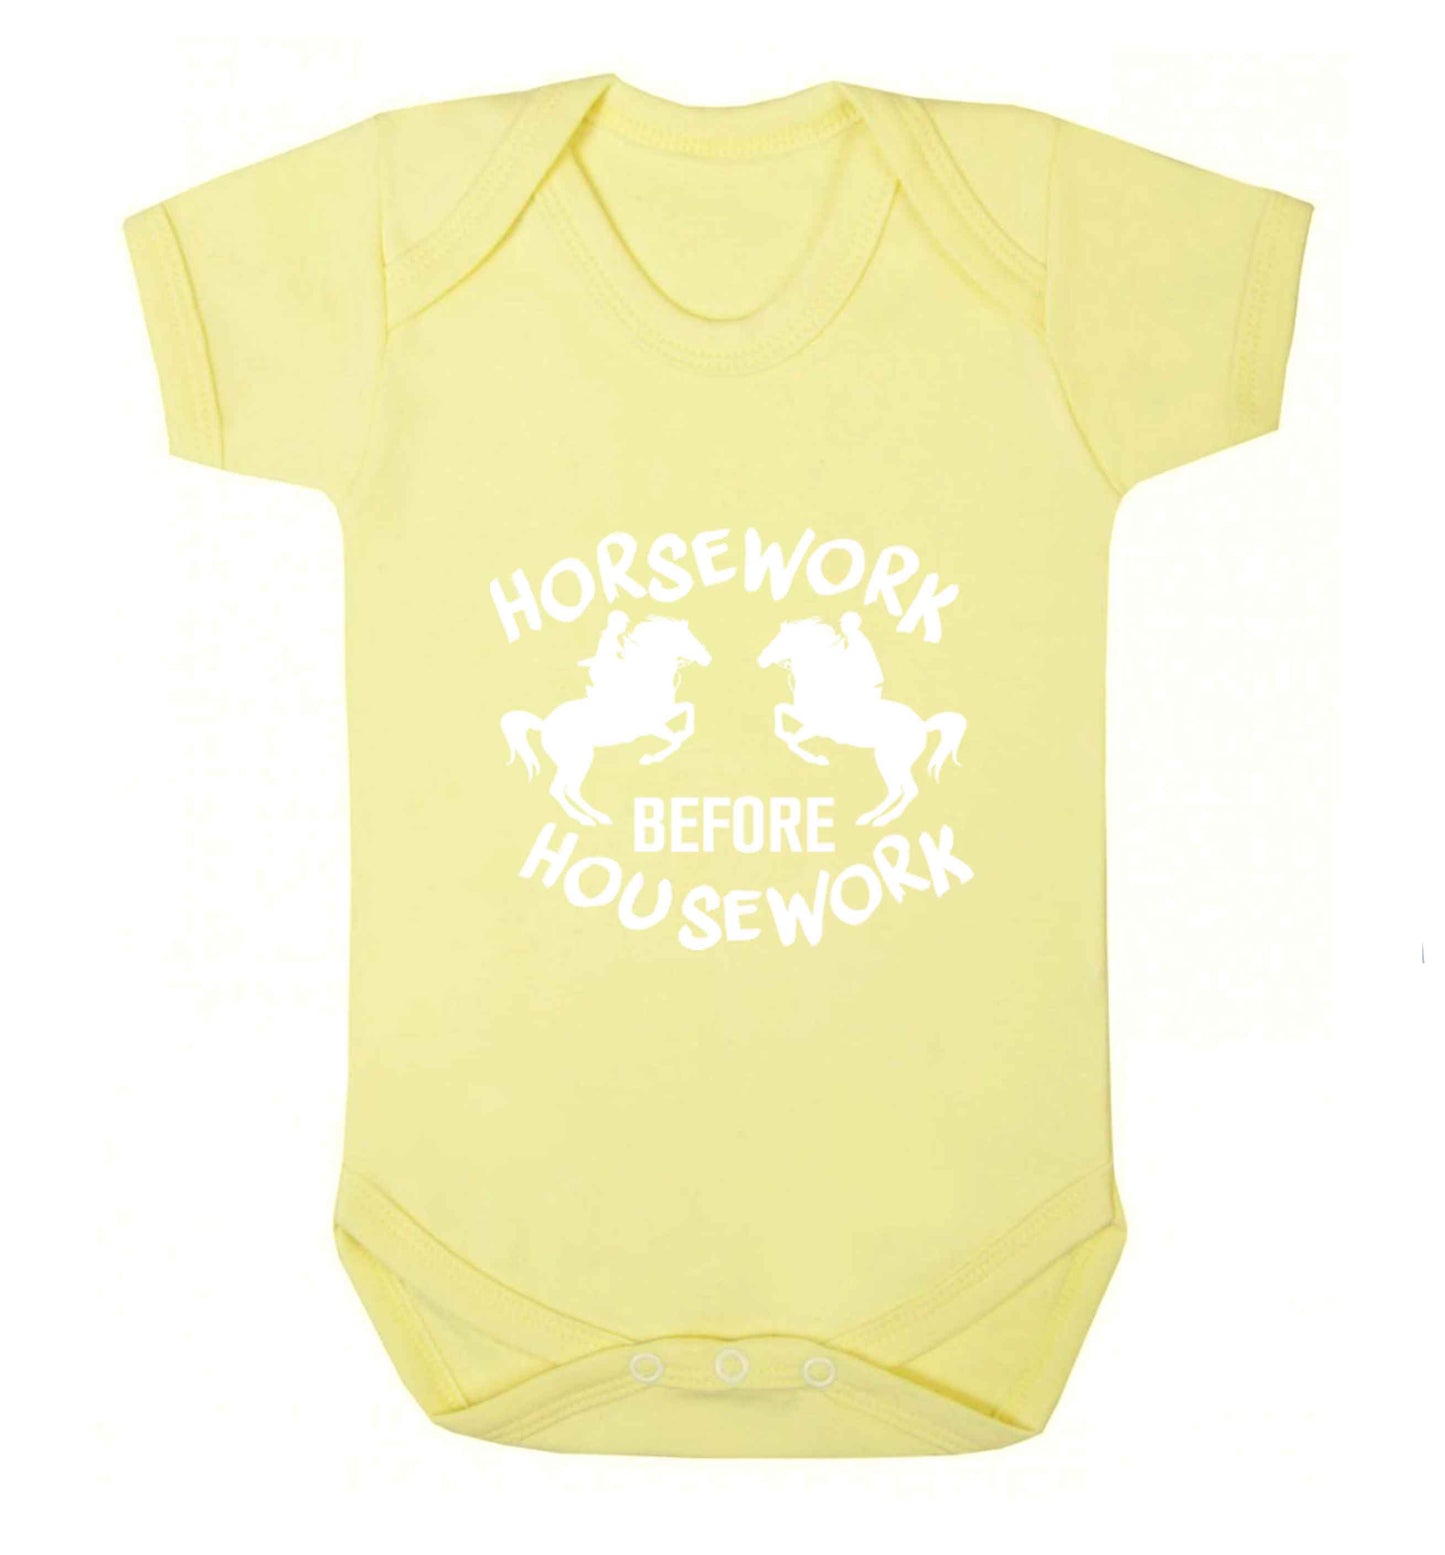 Horsework before housework baby vest pale yellow 18-24 months